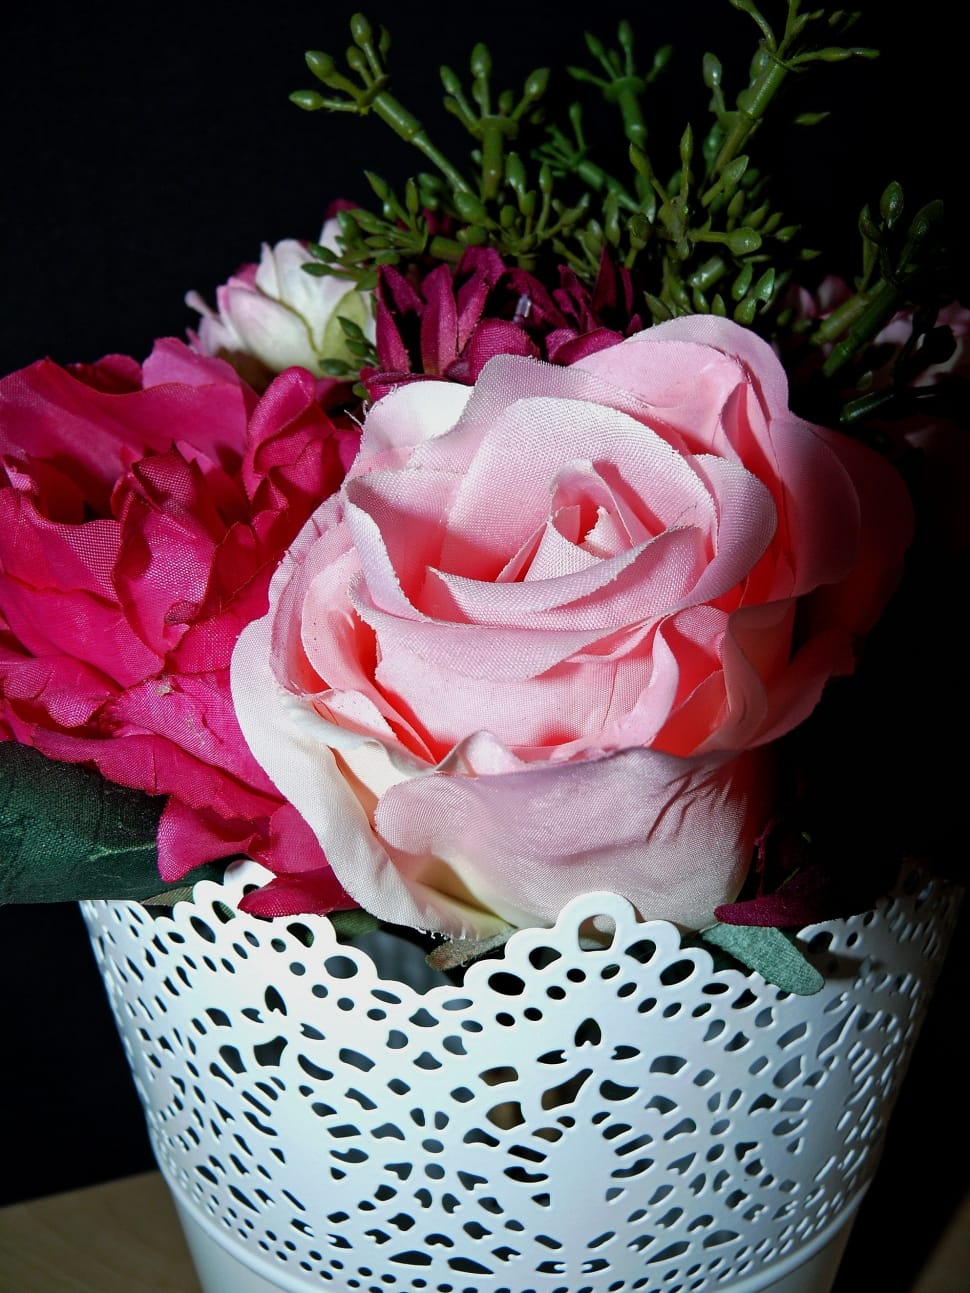 Flowers, Deco, Artificial Flowers, flower, rose - flower preview